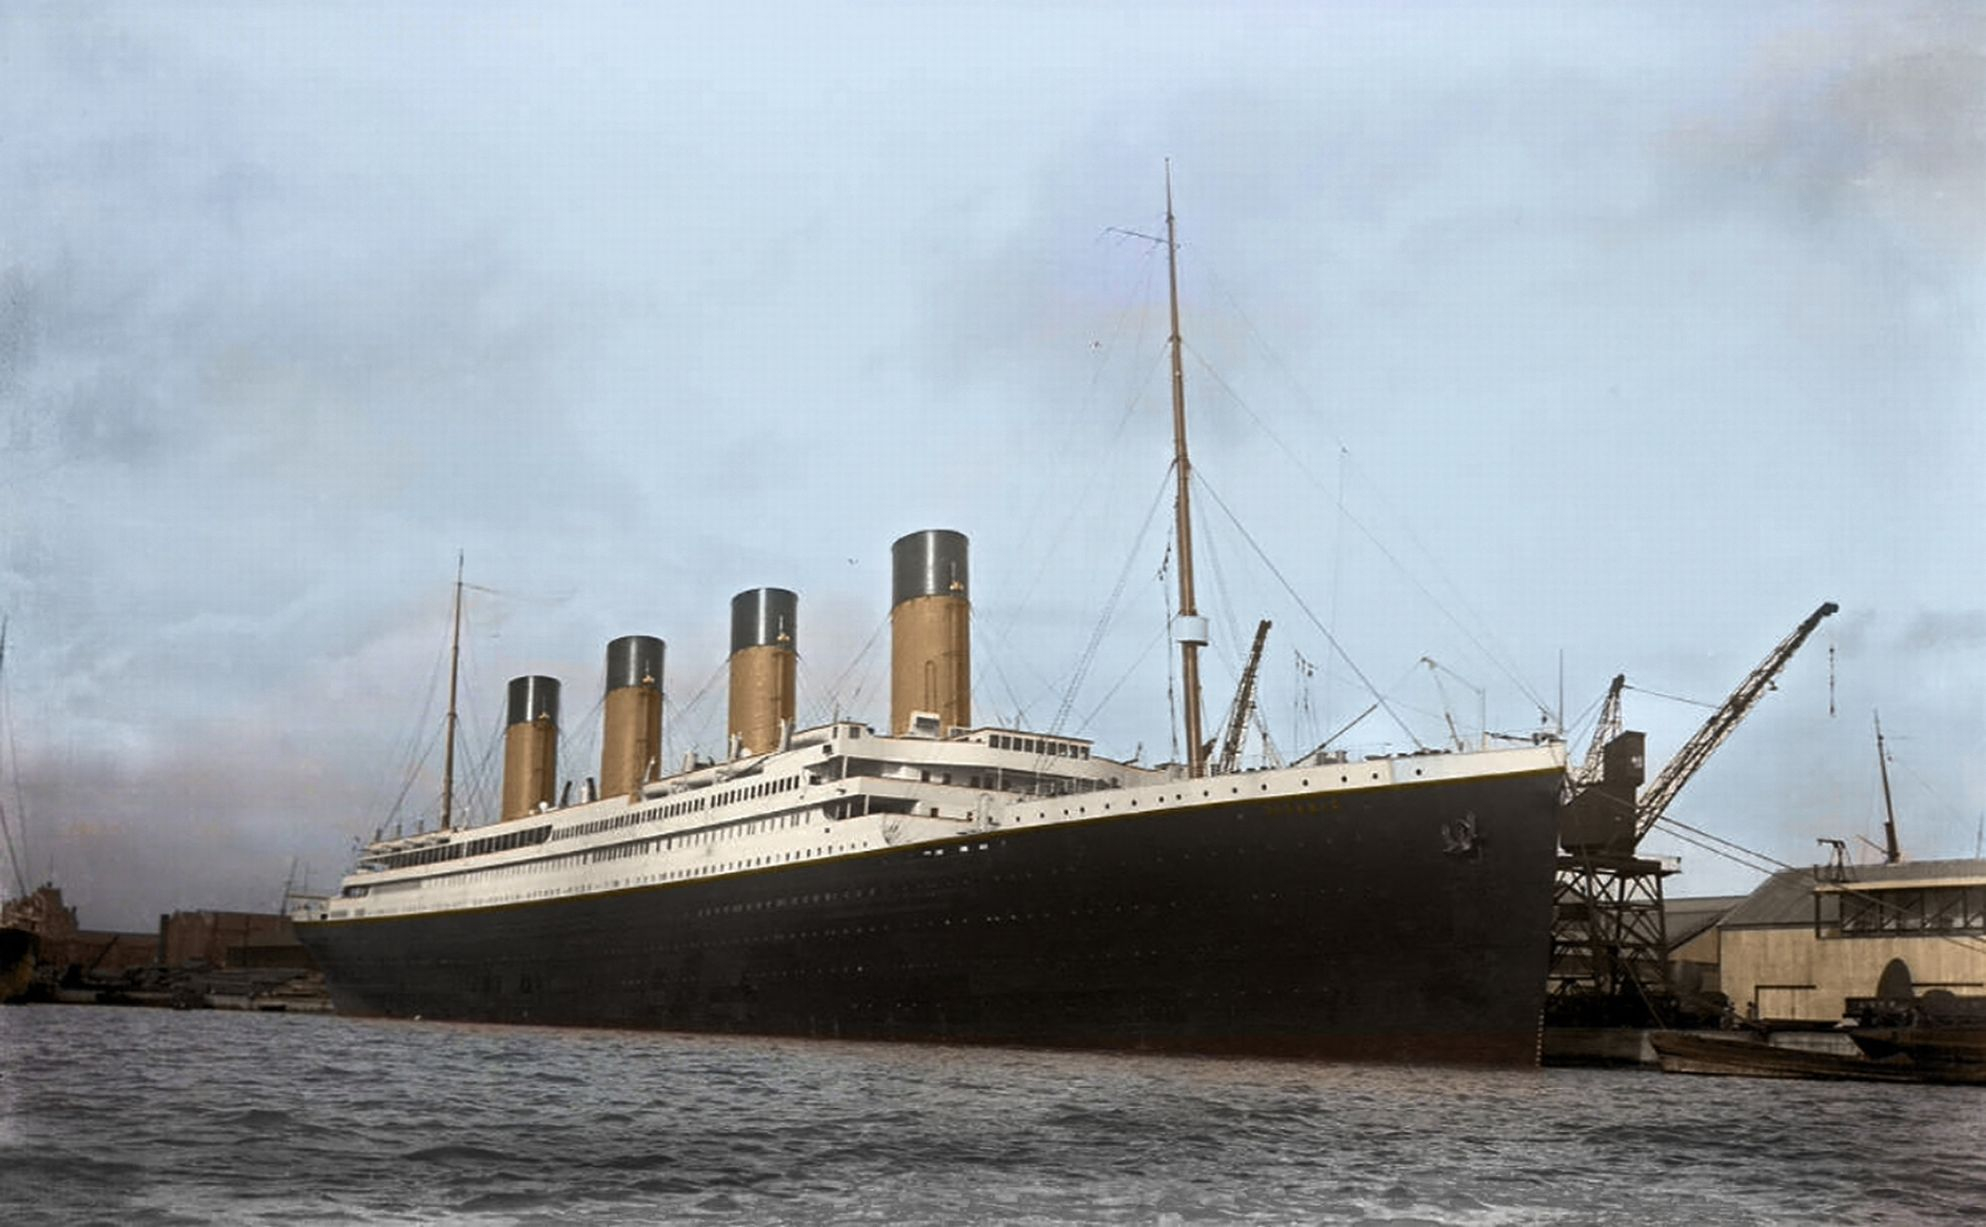 PAY-Amazing-images-that-bring-back-to-life-Titanic-in-Colour-Photos-of-One-of-the-Largest-Pass...jpg